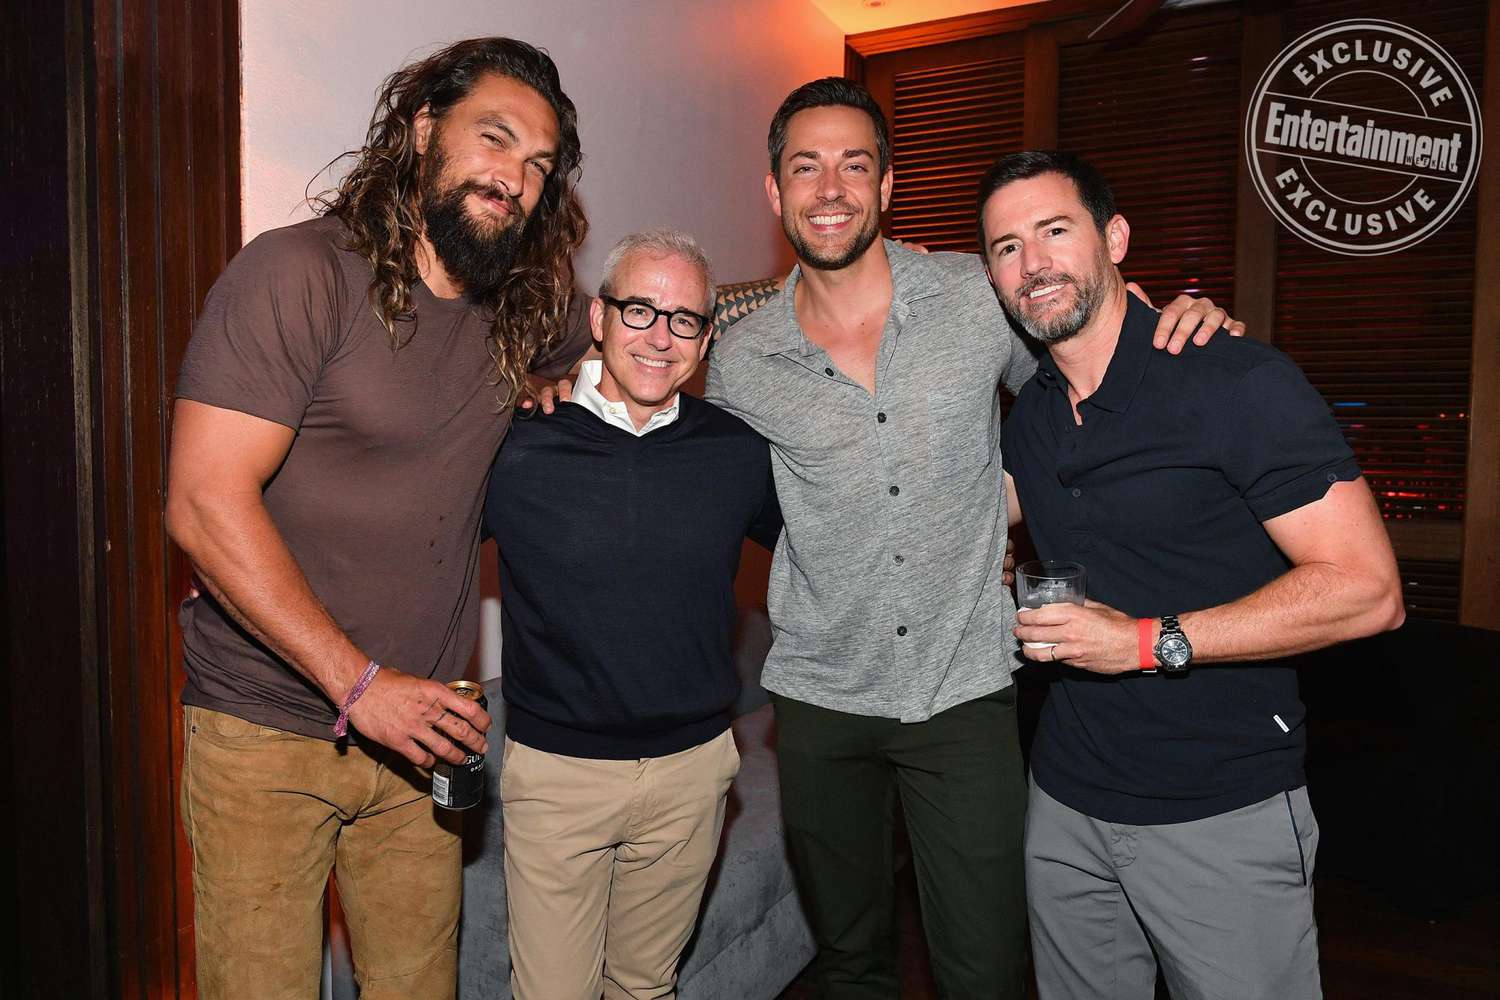 Entertainment Weekly Hosts Its Annual Comic-Con Party At FLOAT At The Hard Rock Hotel In San Diego In Celebration Of Comic-Con 2018 - Inside